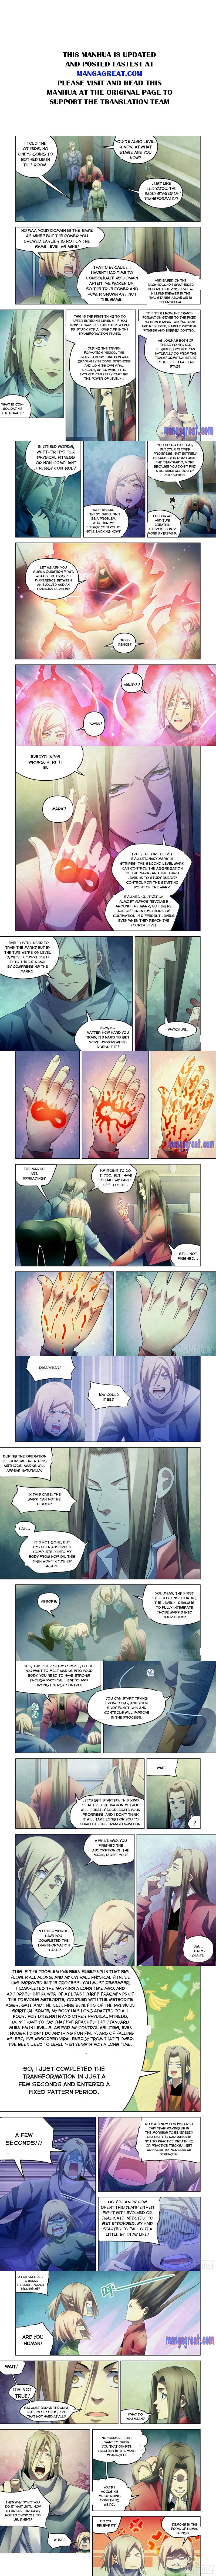 The Last Human Chapter 335 page 1